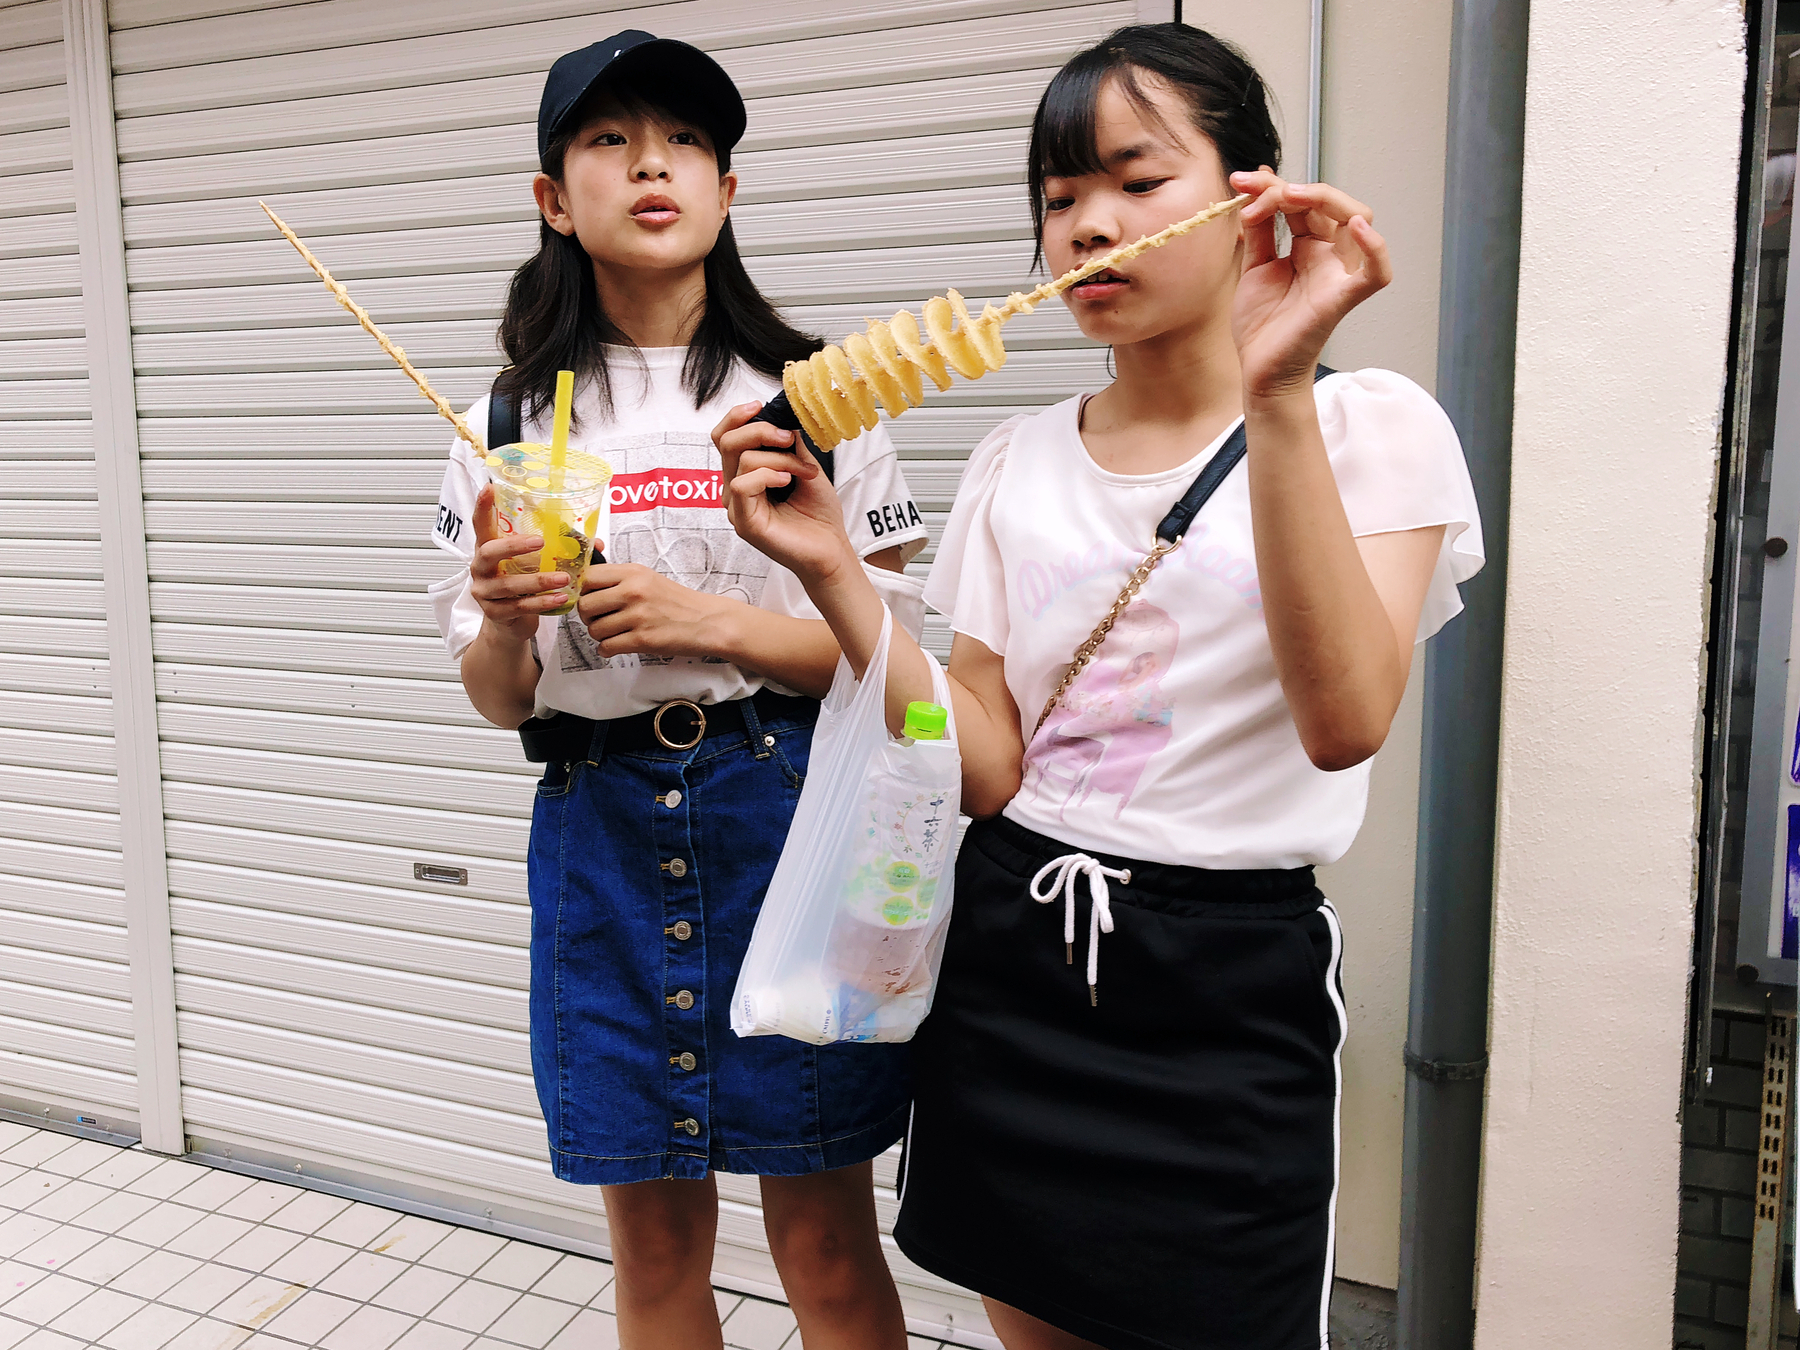 Teenagers eating something from a stick